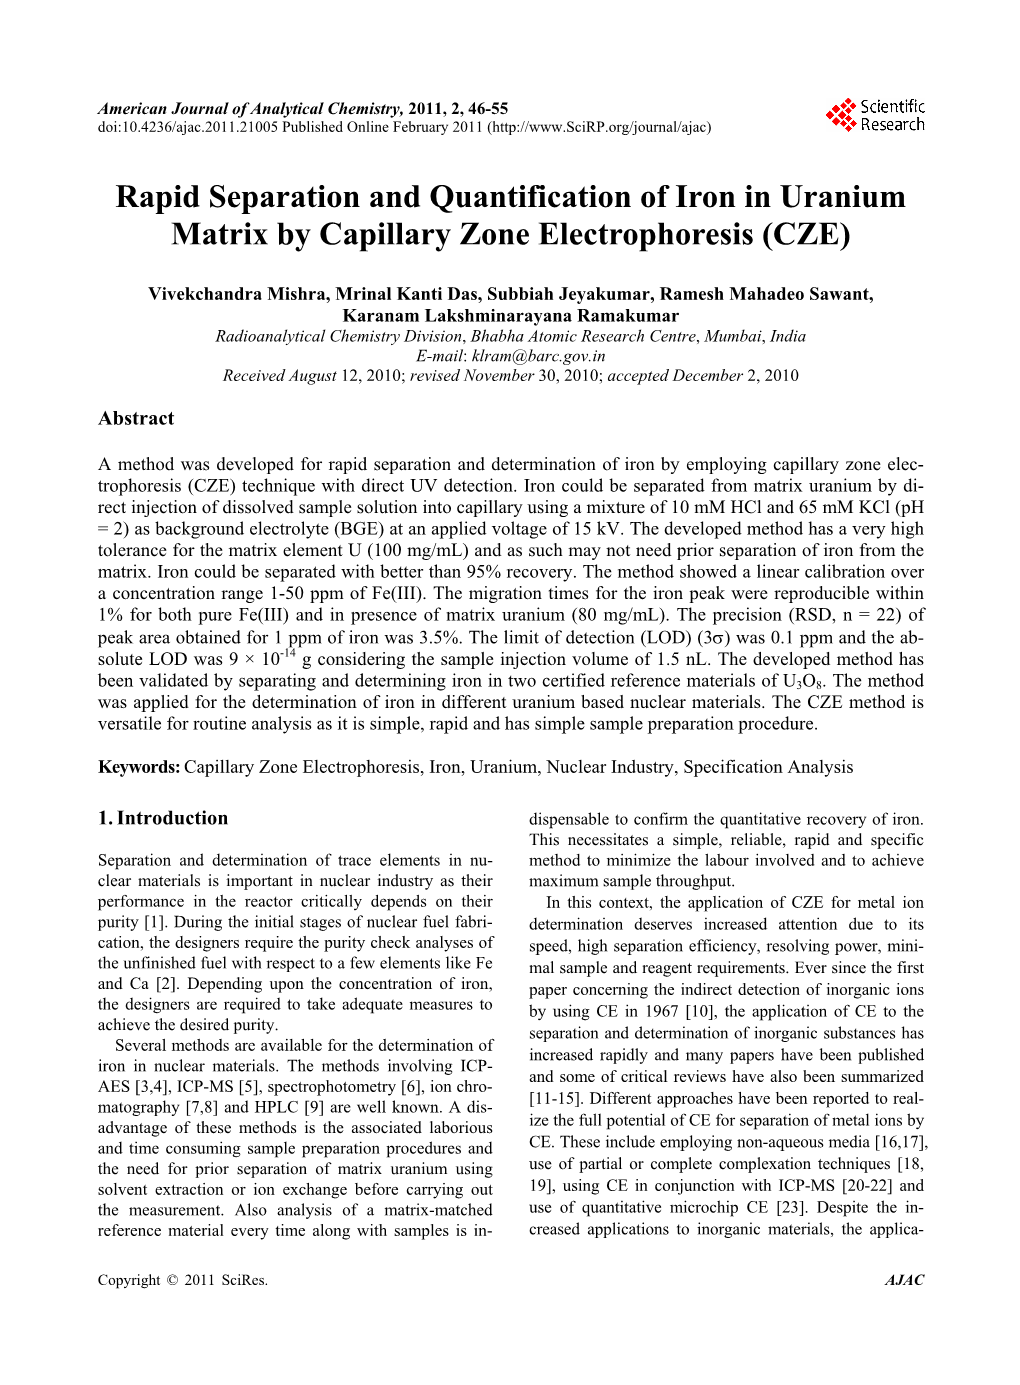 Rapid Separation and Quantification of Iron in Uranium Nuclear Matrix by Capillary Zone Electrophoresis (CZE)